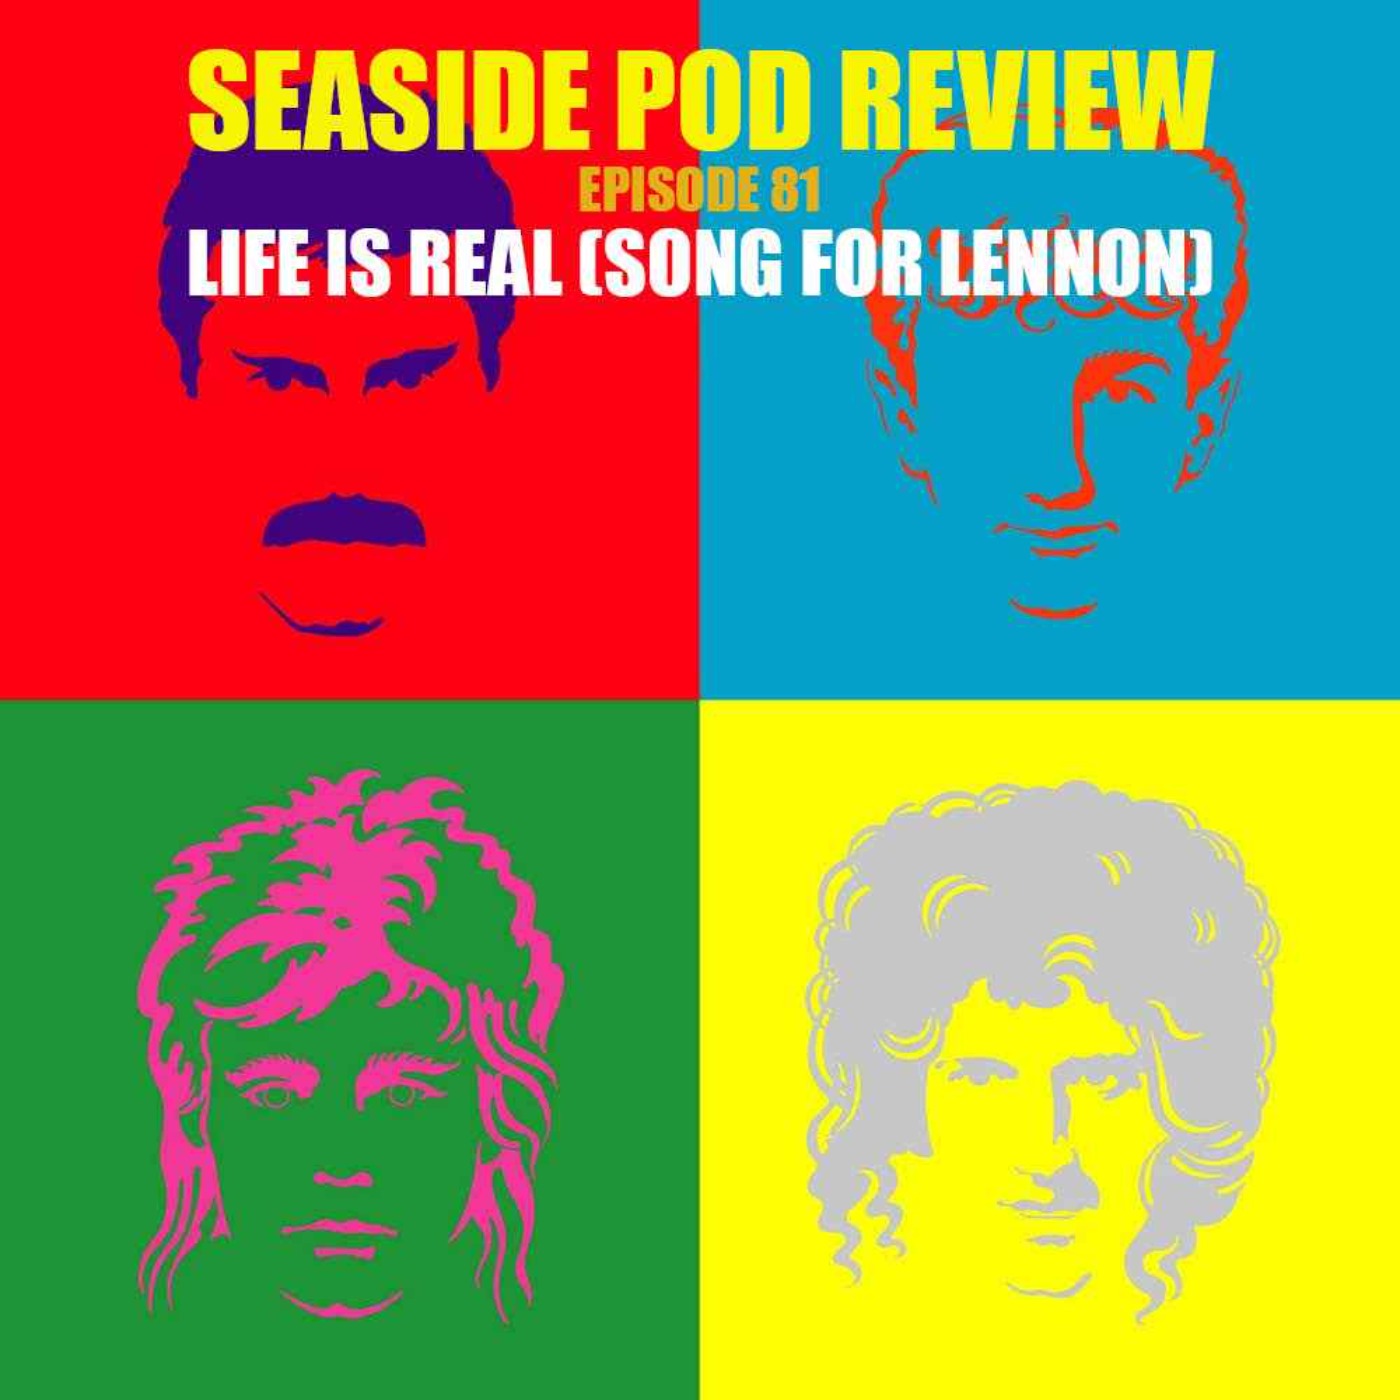 Life Is Real (Song for Lennon)